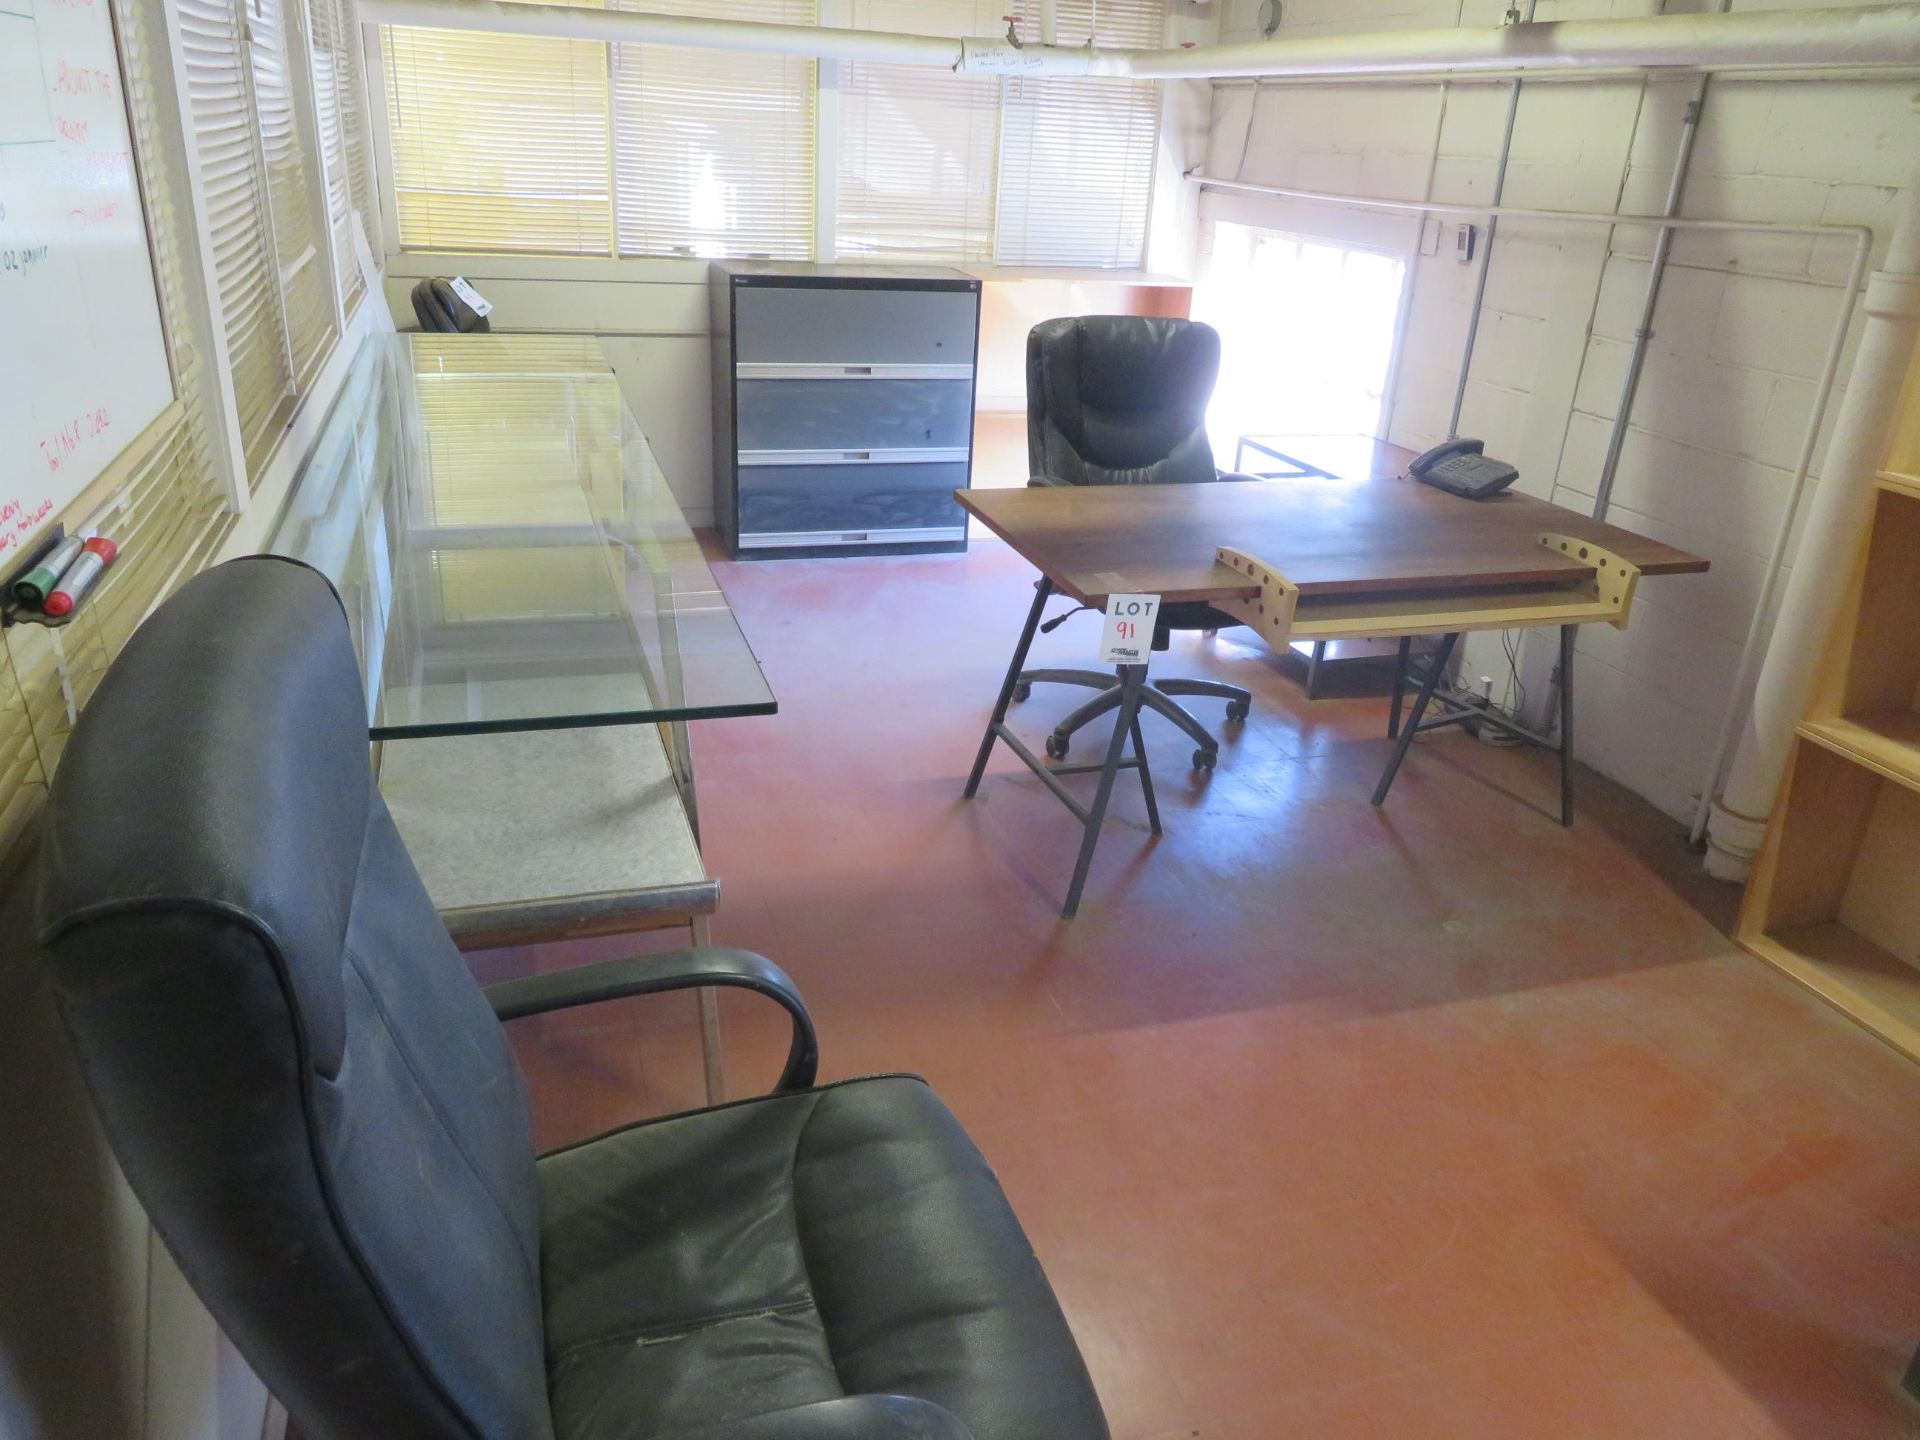 LOT including complete office with desks, filing cabinet, chairs, etc.